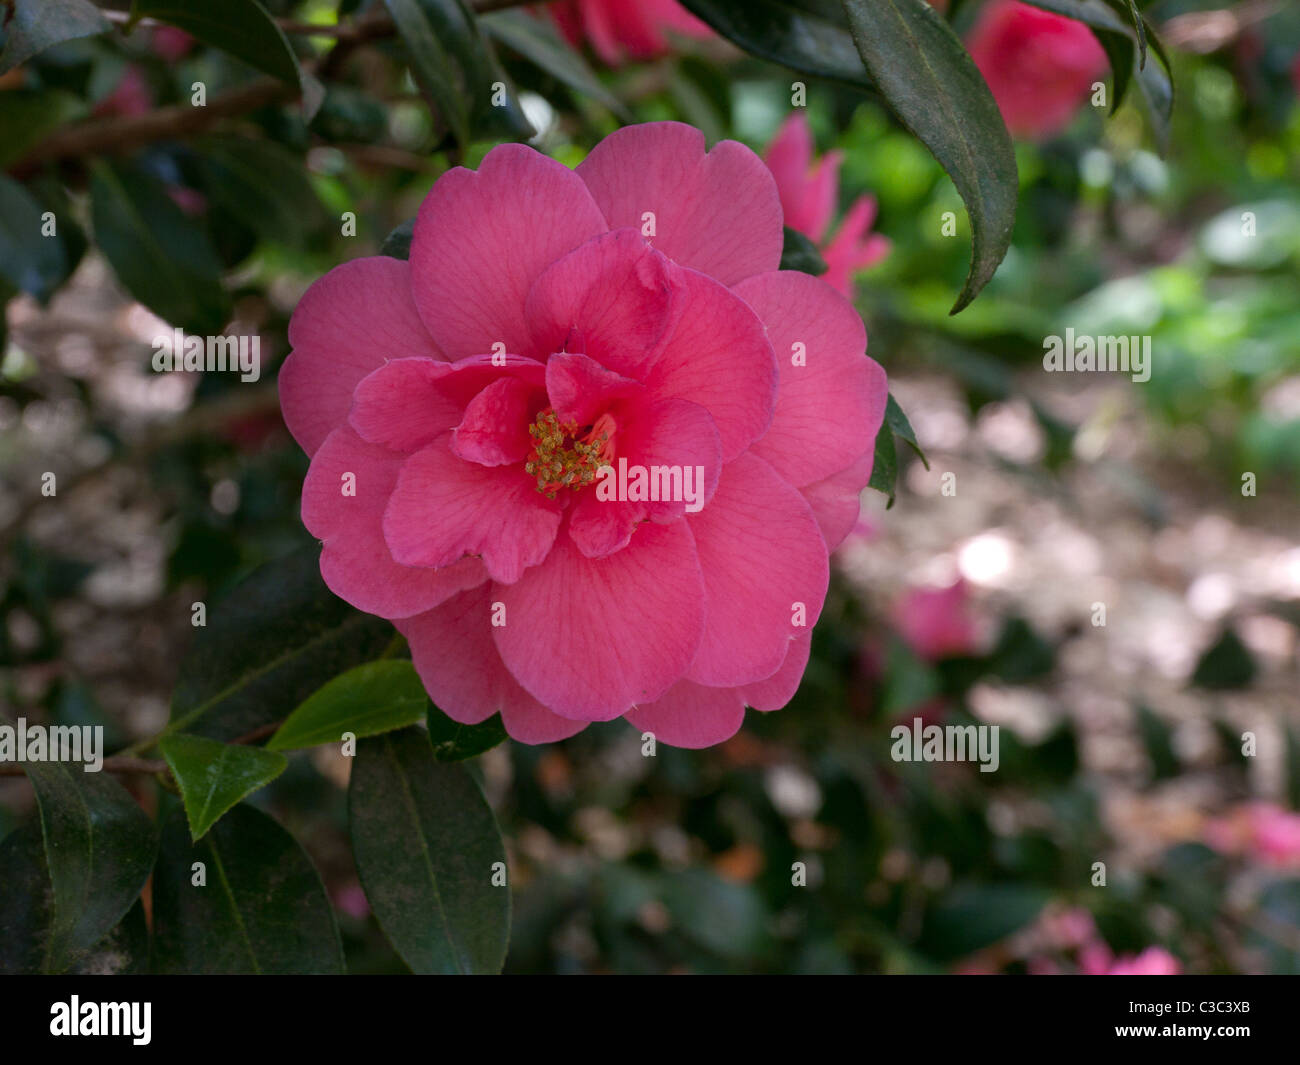 A flower bloom in the Royal Horticultural Society gardens at Wisley, UK Stock Photo